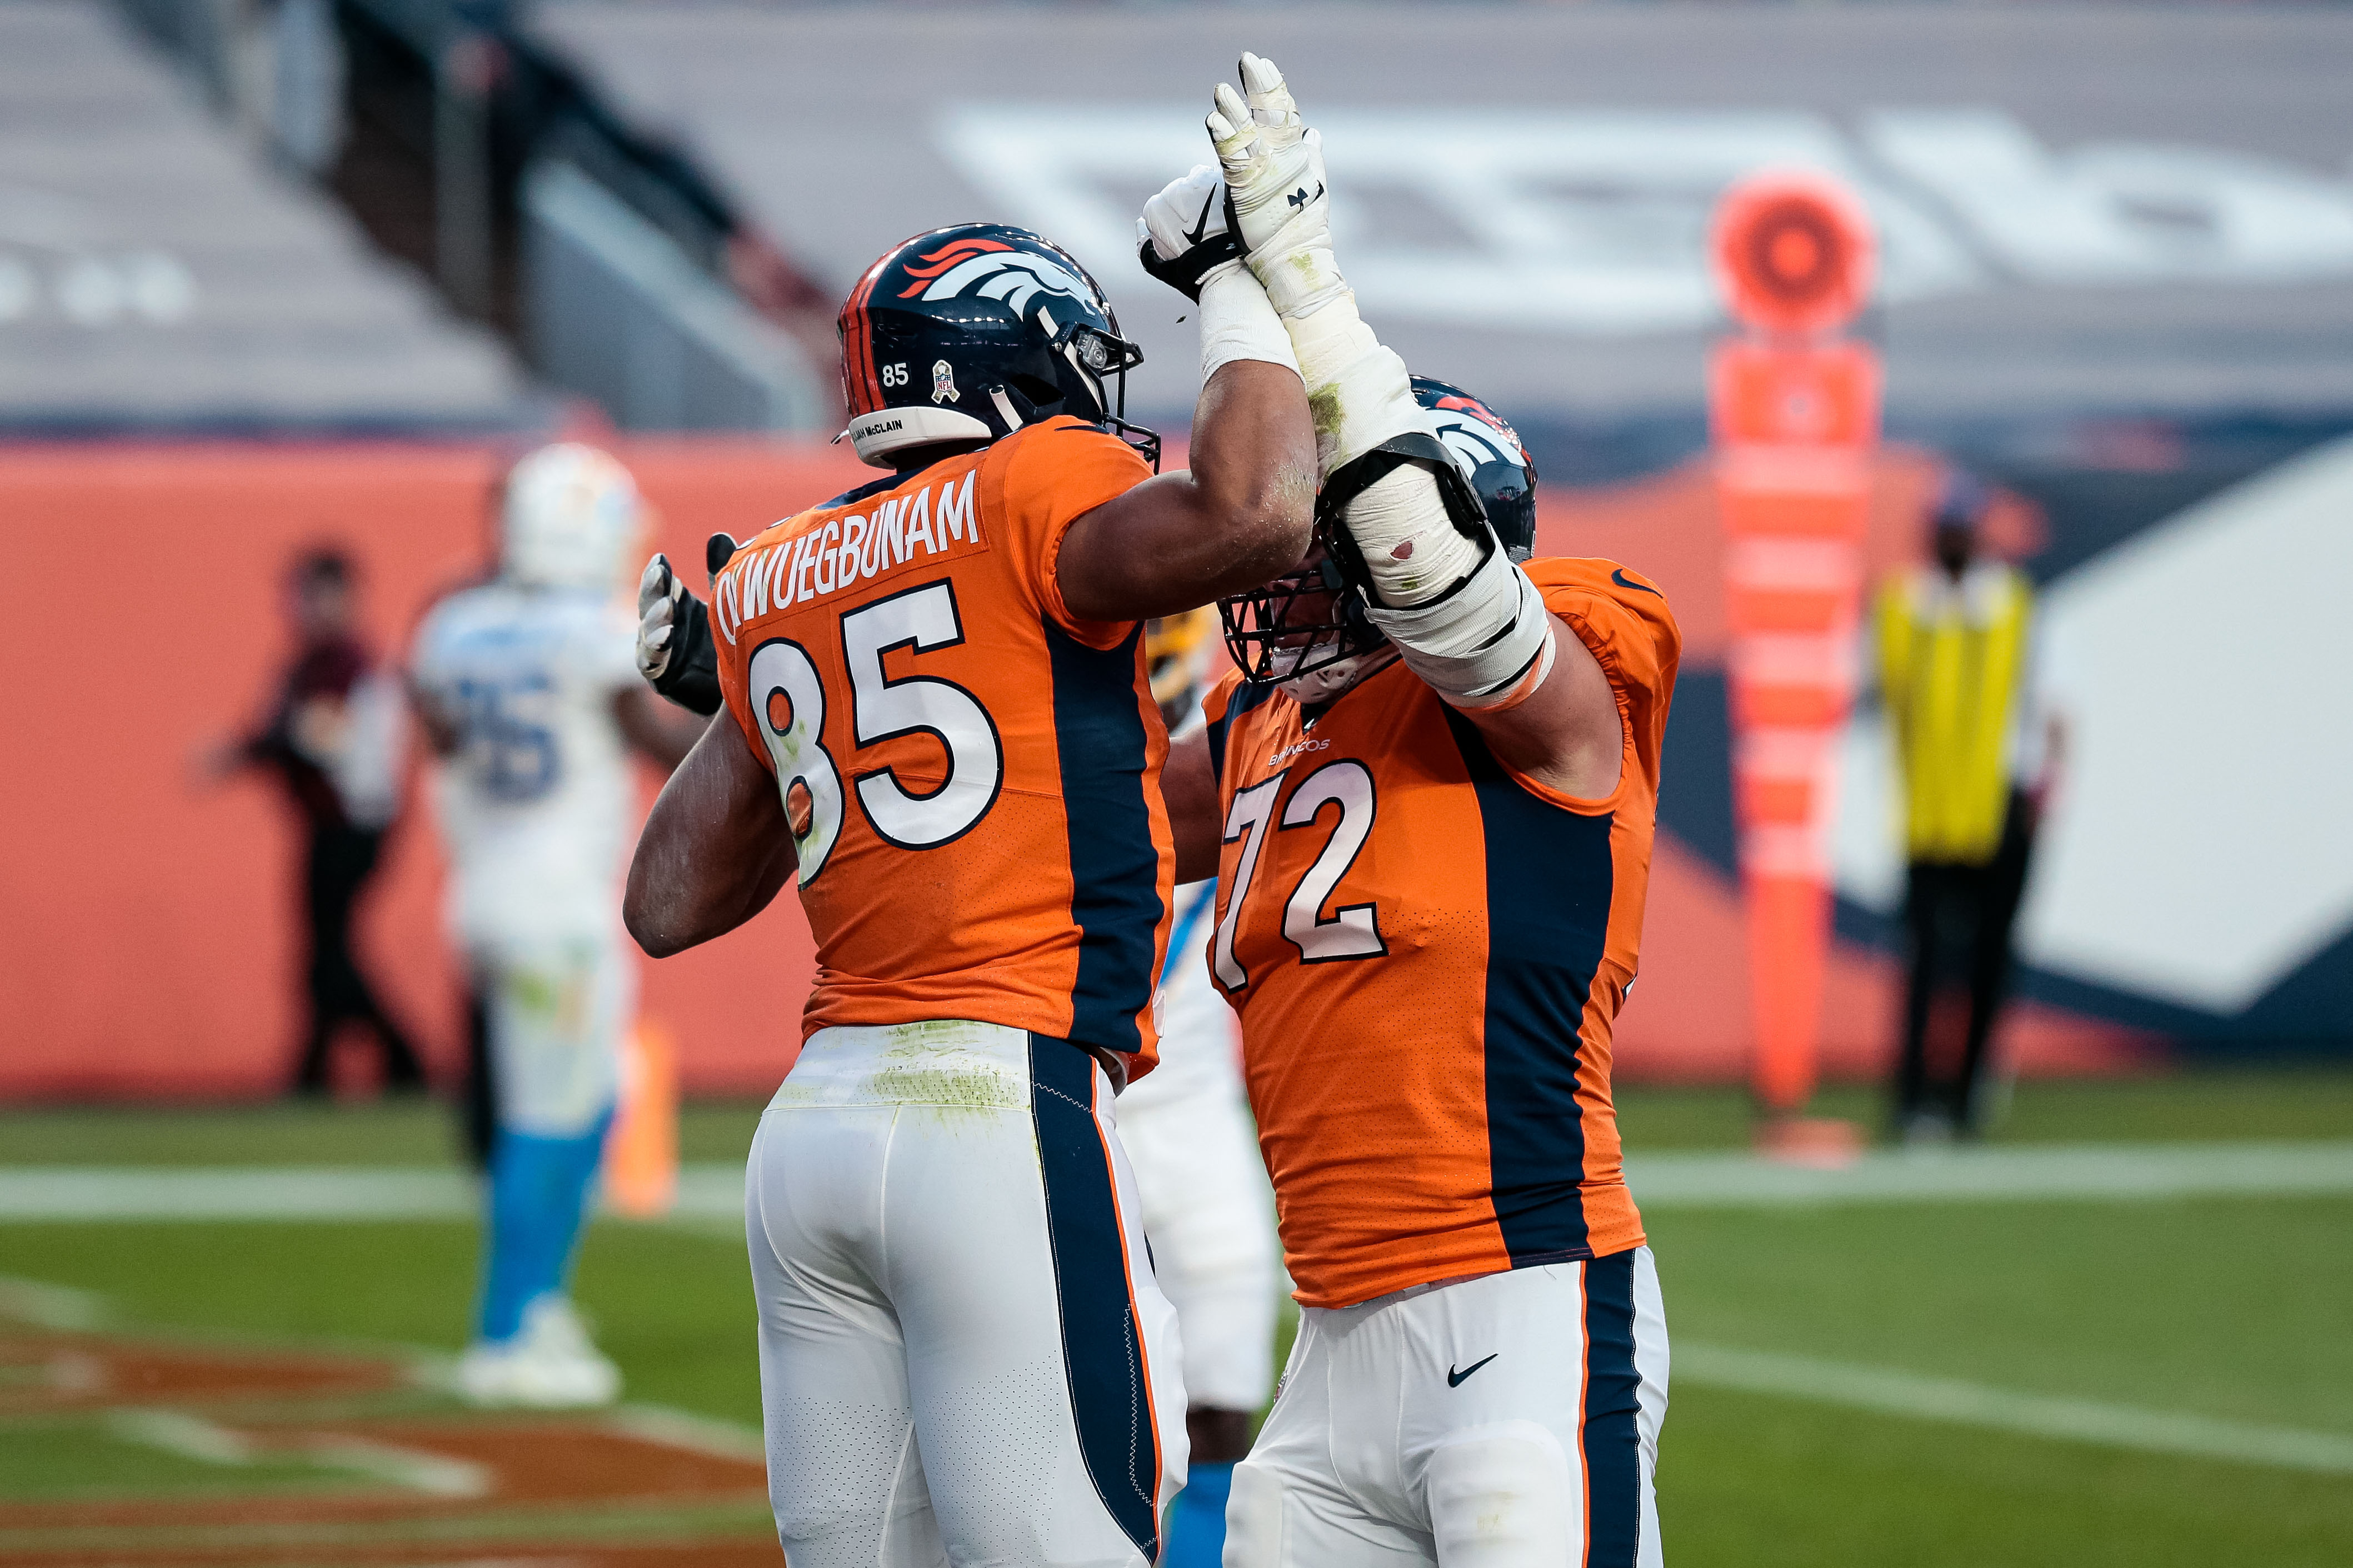 Denver Broncos tight end Albert Okwuegbunam (85) celebrates his touchdown with offensive tackle Garett Bolles (72) in the fourth quarter against the Los Angeles Chargers at Empower Field at Mile High.